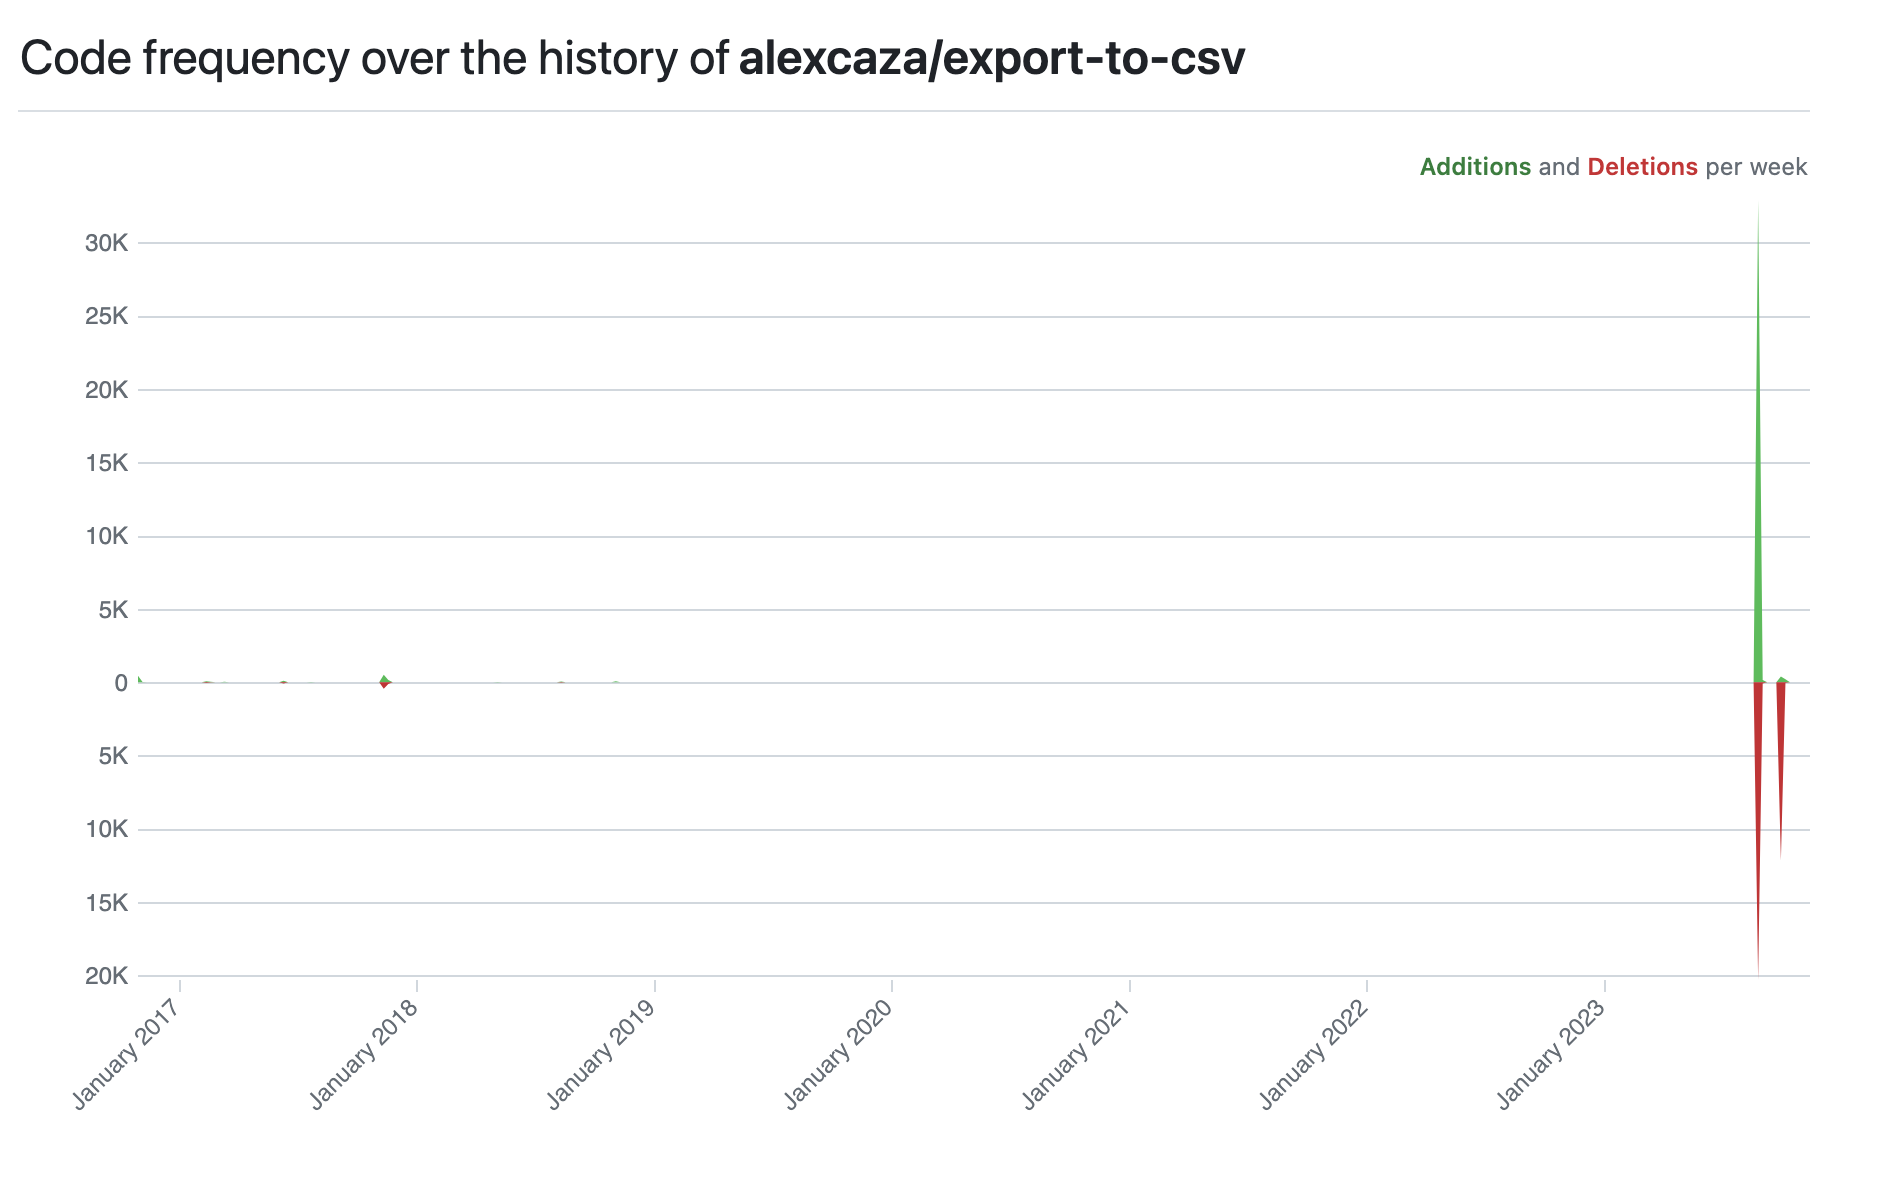 Code change history for the export-to-csv repository